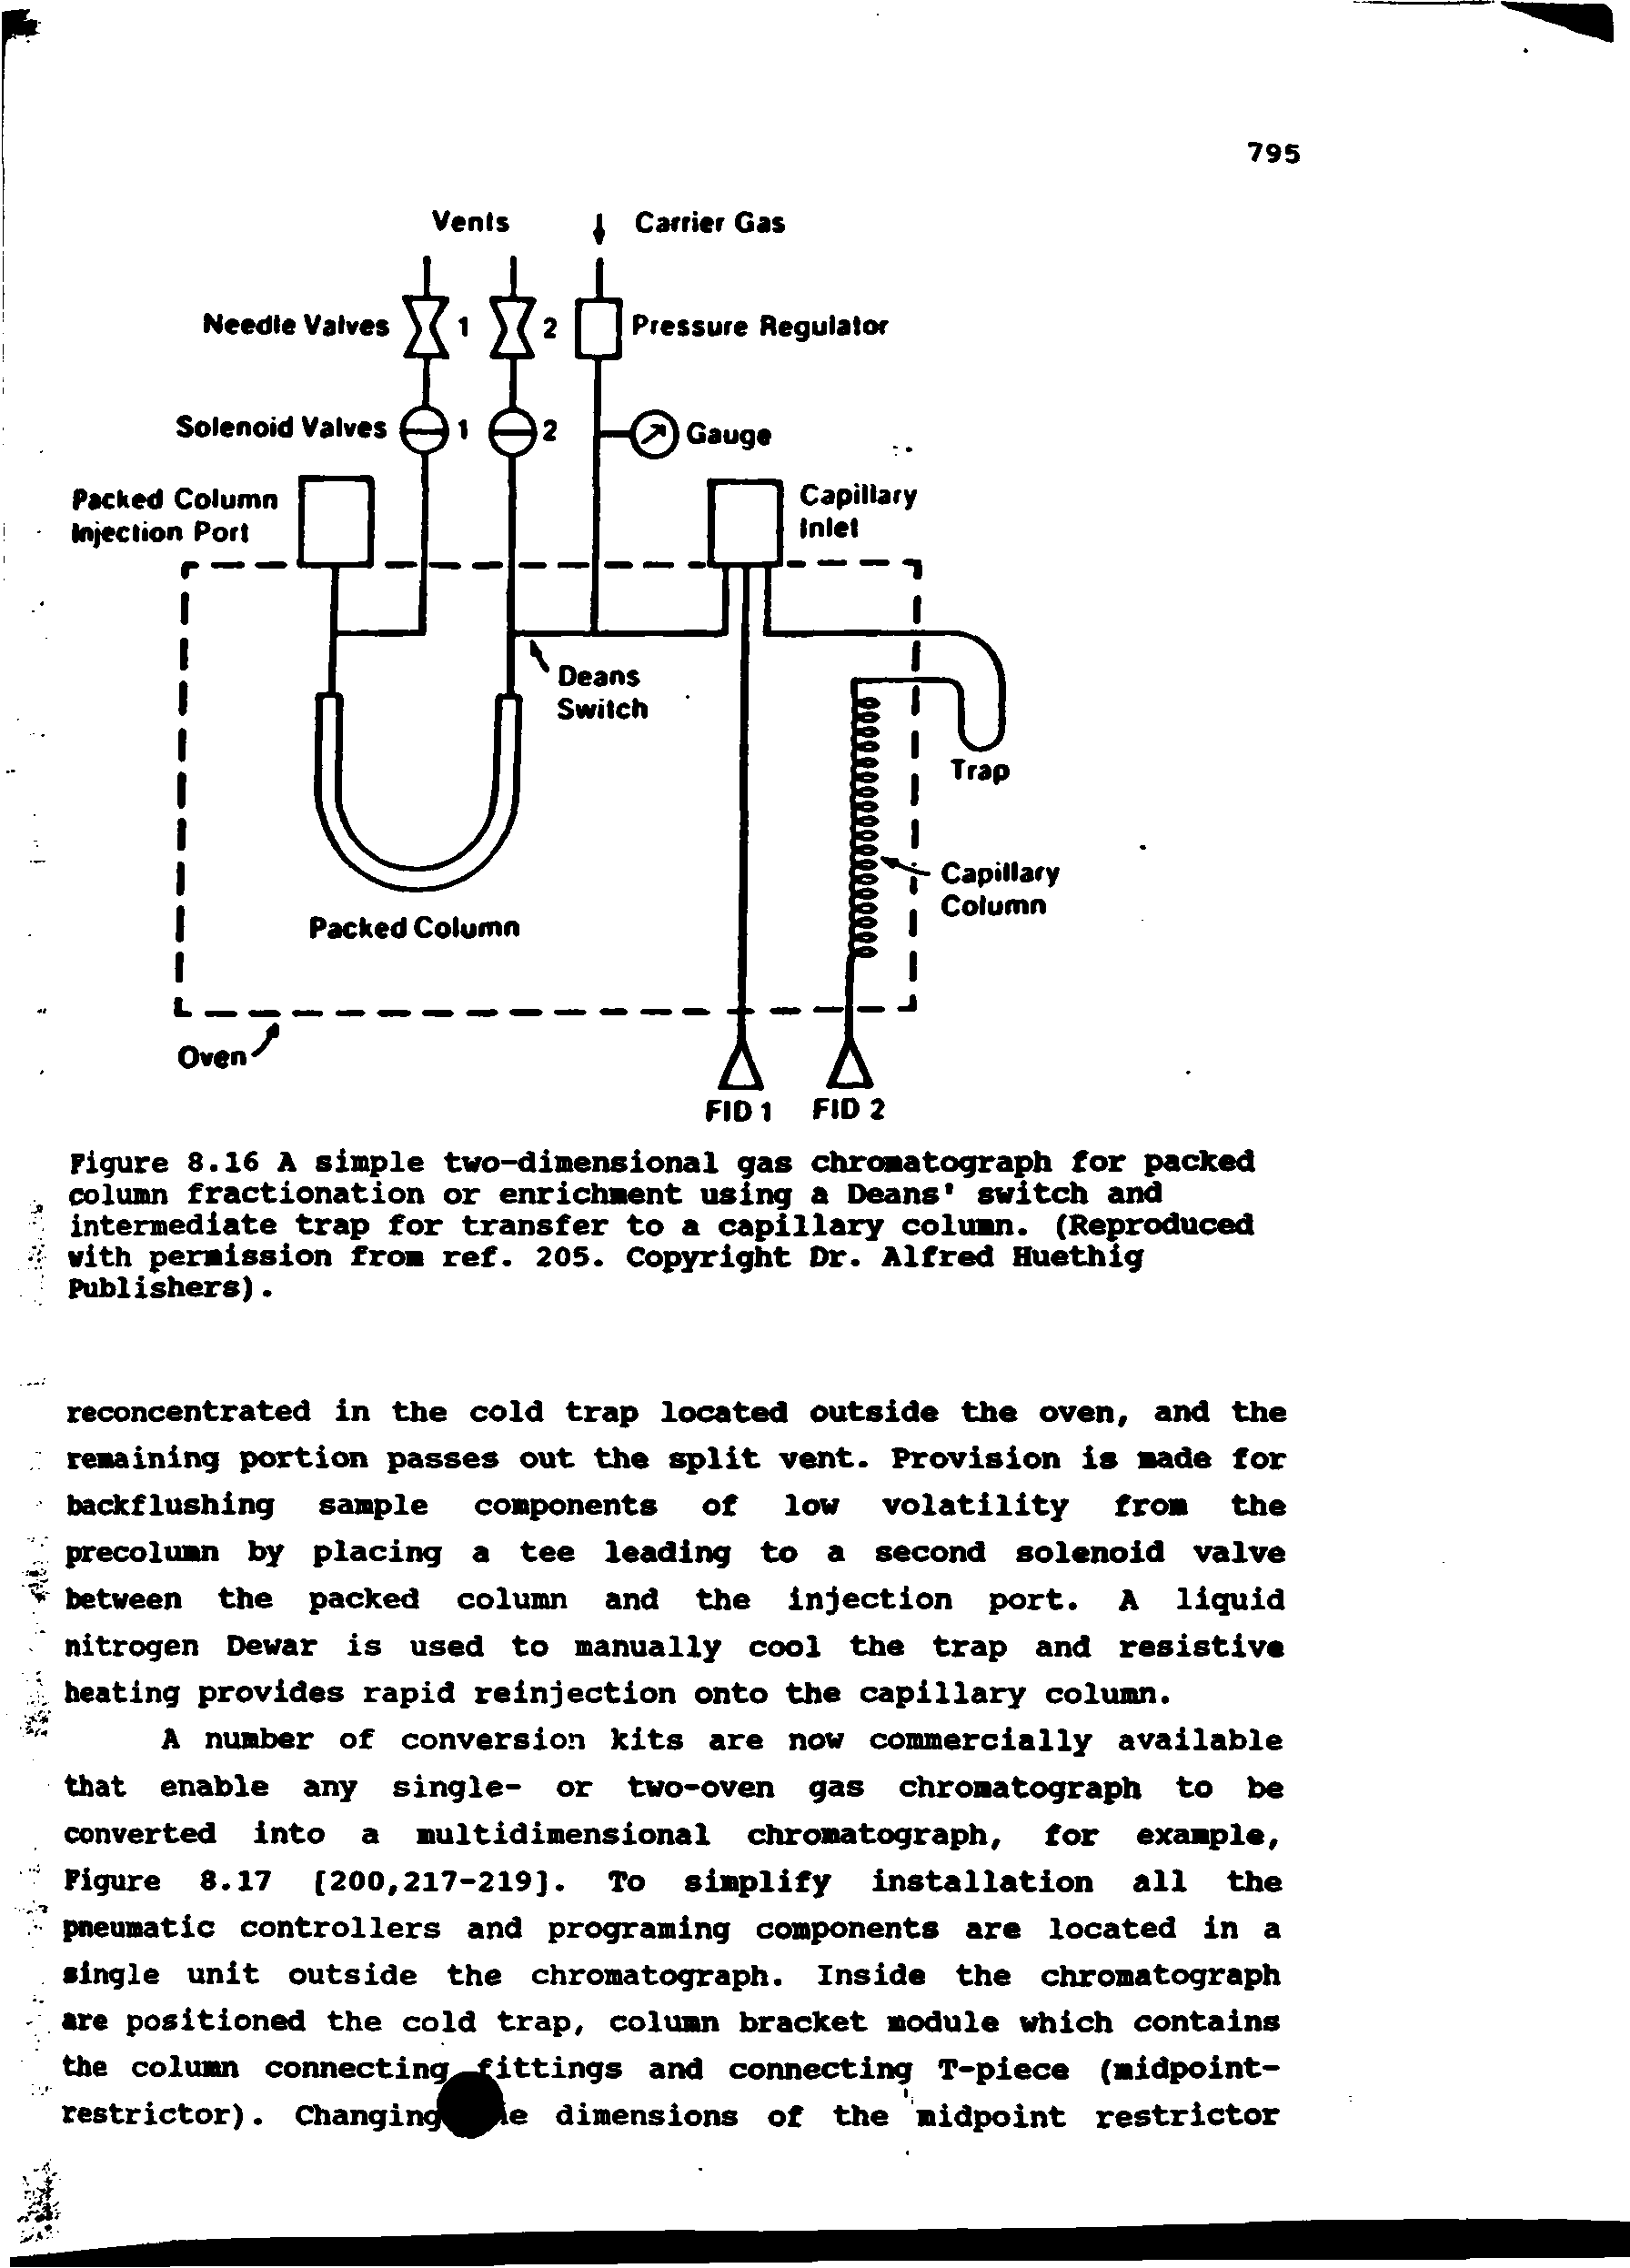 Figure 8.16 A simple two-dimensional gas chrtwatograph for packed column fractionation or enrichment using a Deans switch and intermediate trap for transfer to a capillary column. (Reproduced with permission from ref. 205. Copyright Dr. Alfred Huethig Publishers).